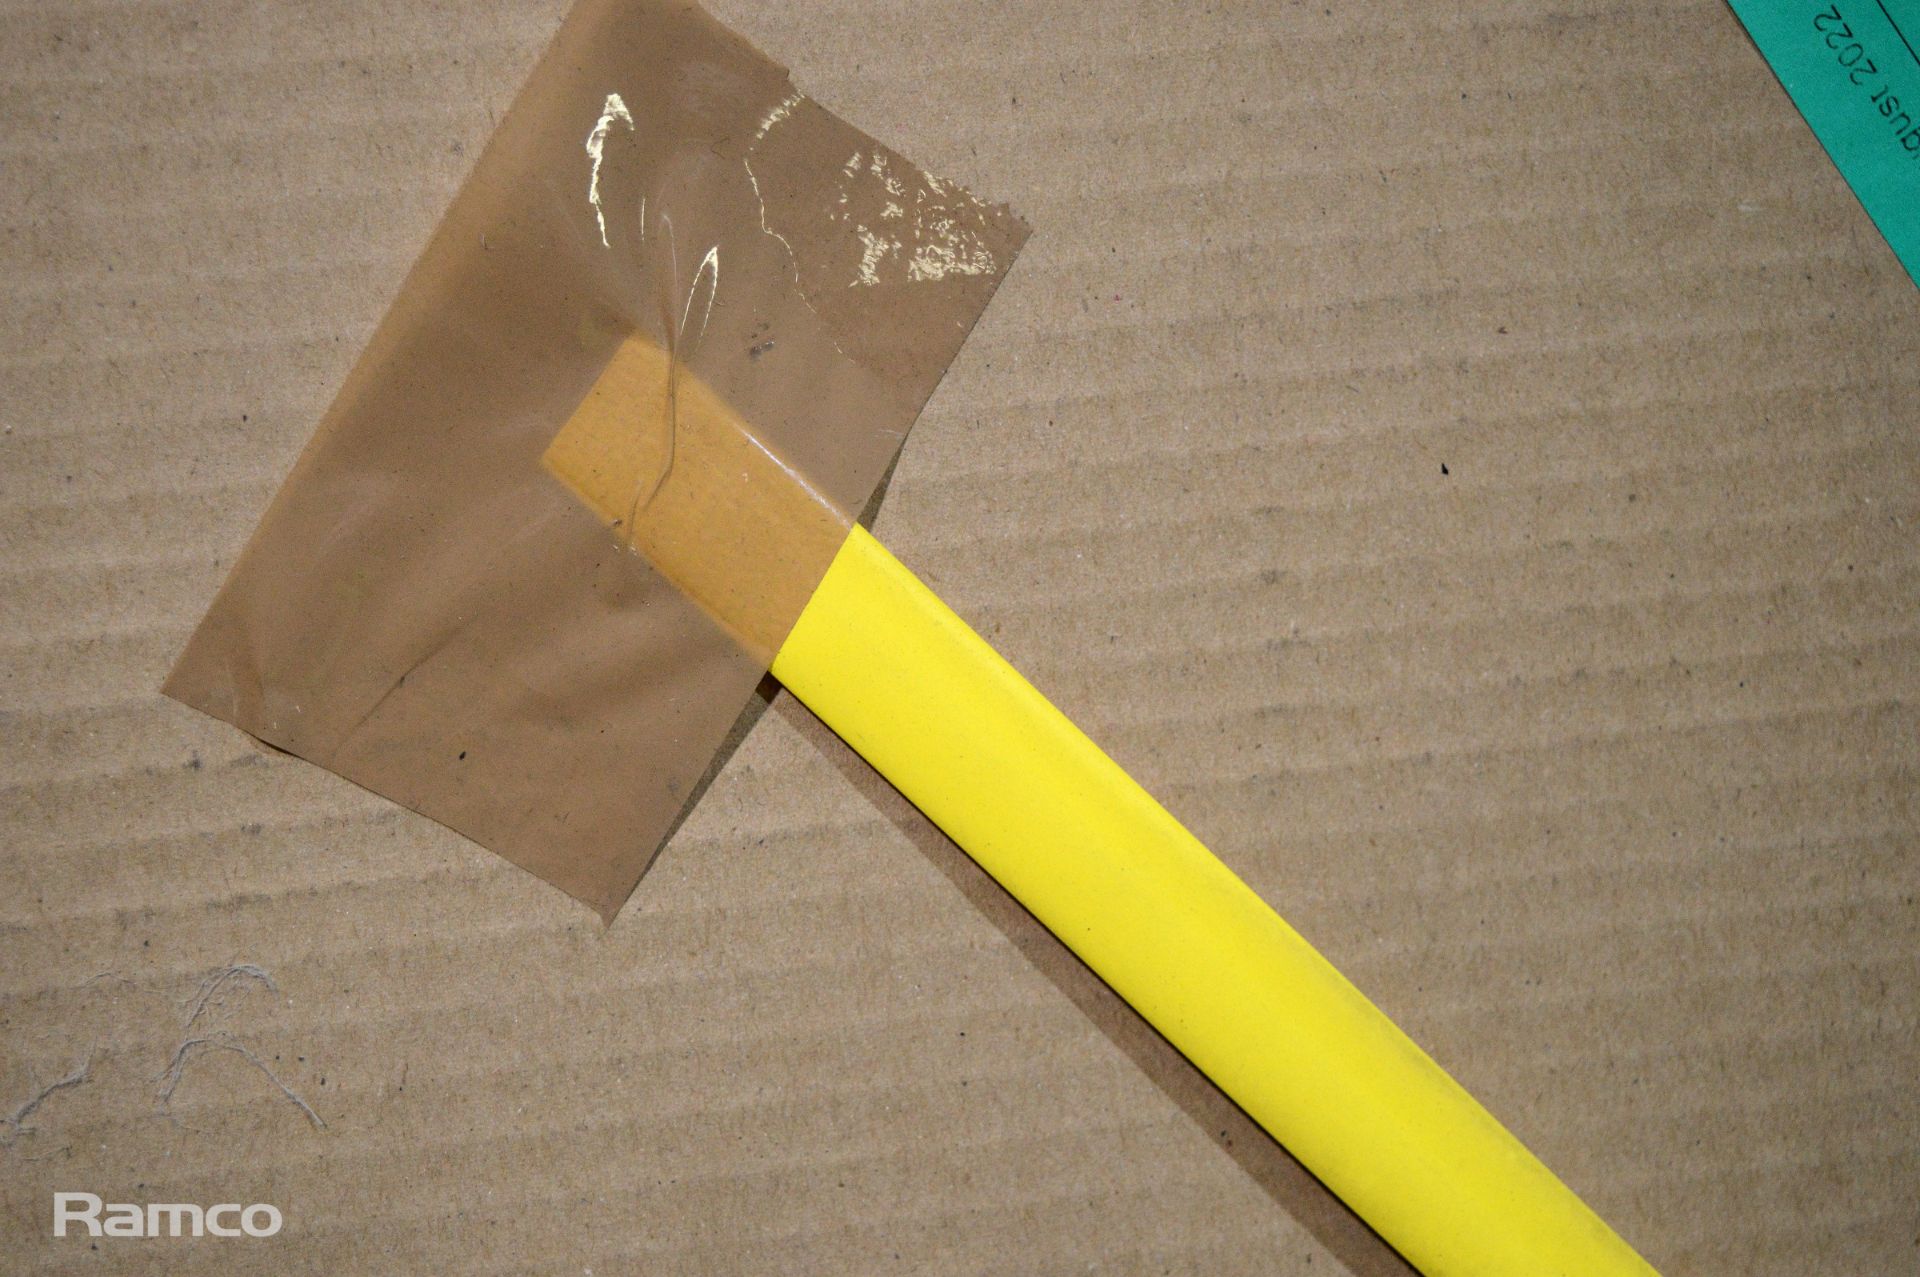 Tyco electronics heat shrink sleeving 3/8 inch - 2 boxes - Image 3 of 3